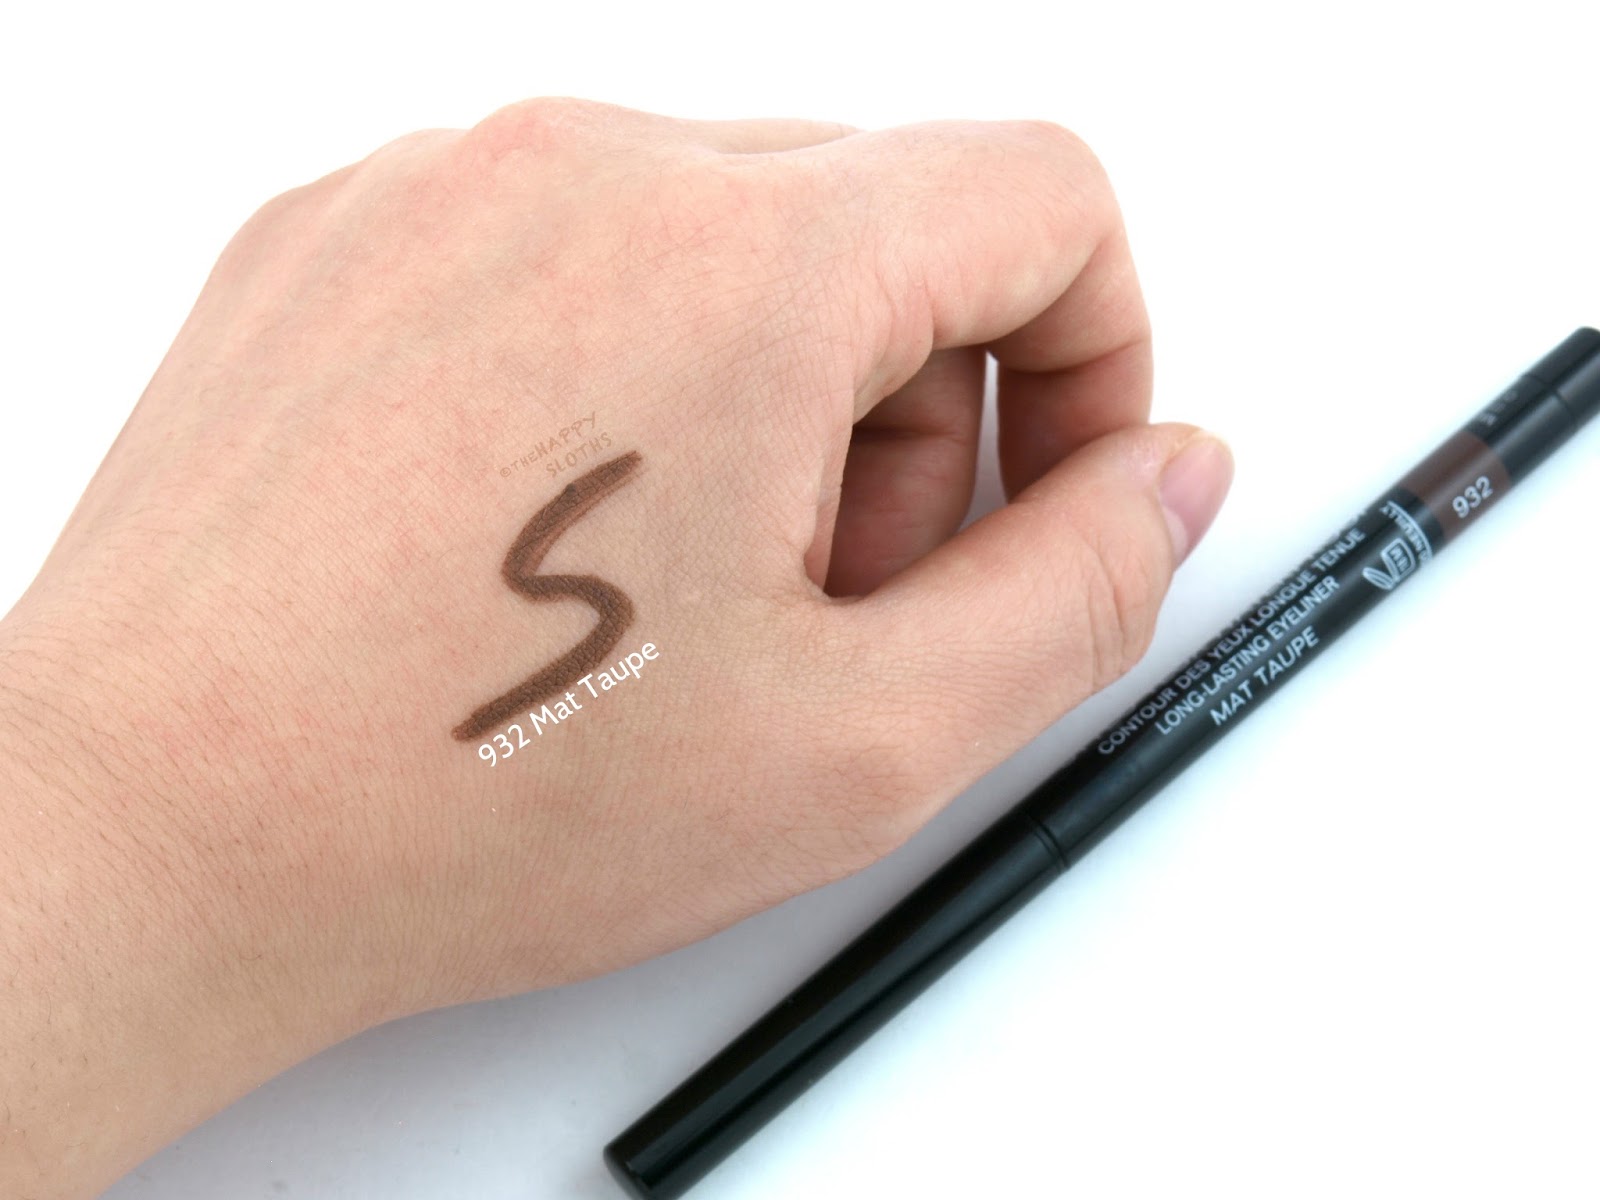 Chanel Stylo Yeux Waterproof in "932 Mat Taupe"